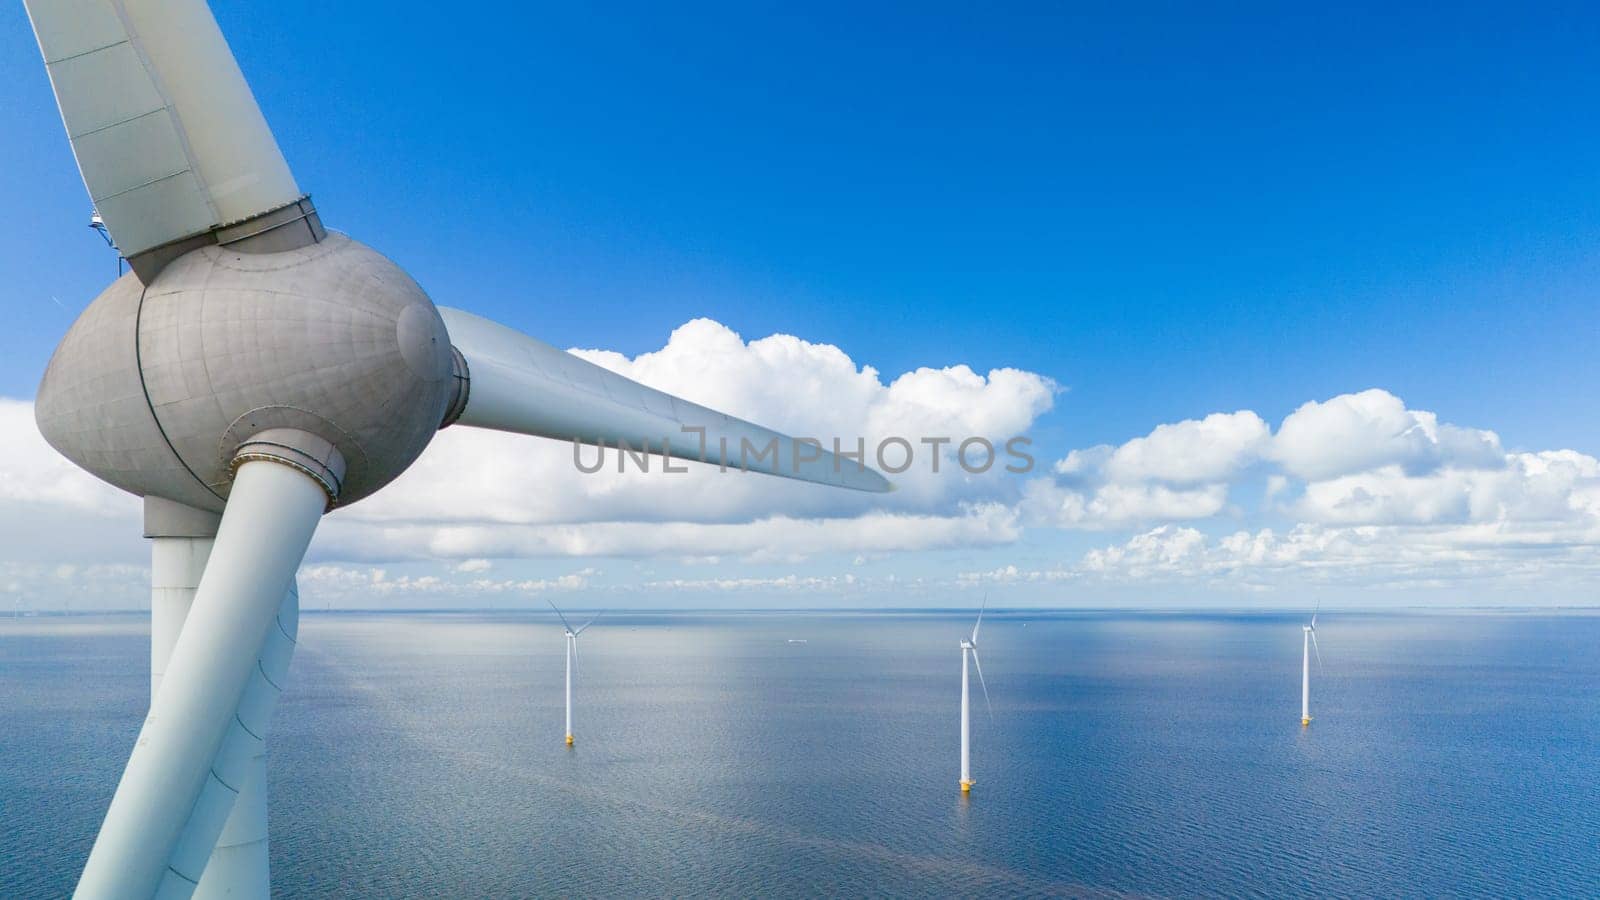 A single wind turbine stands tall in the middle of the vast ocean, harnessing renewable energy while surrounded by an endless expanse of water under a clear blue sky in the Noordoostpolder Netherlands